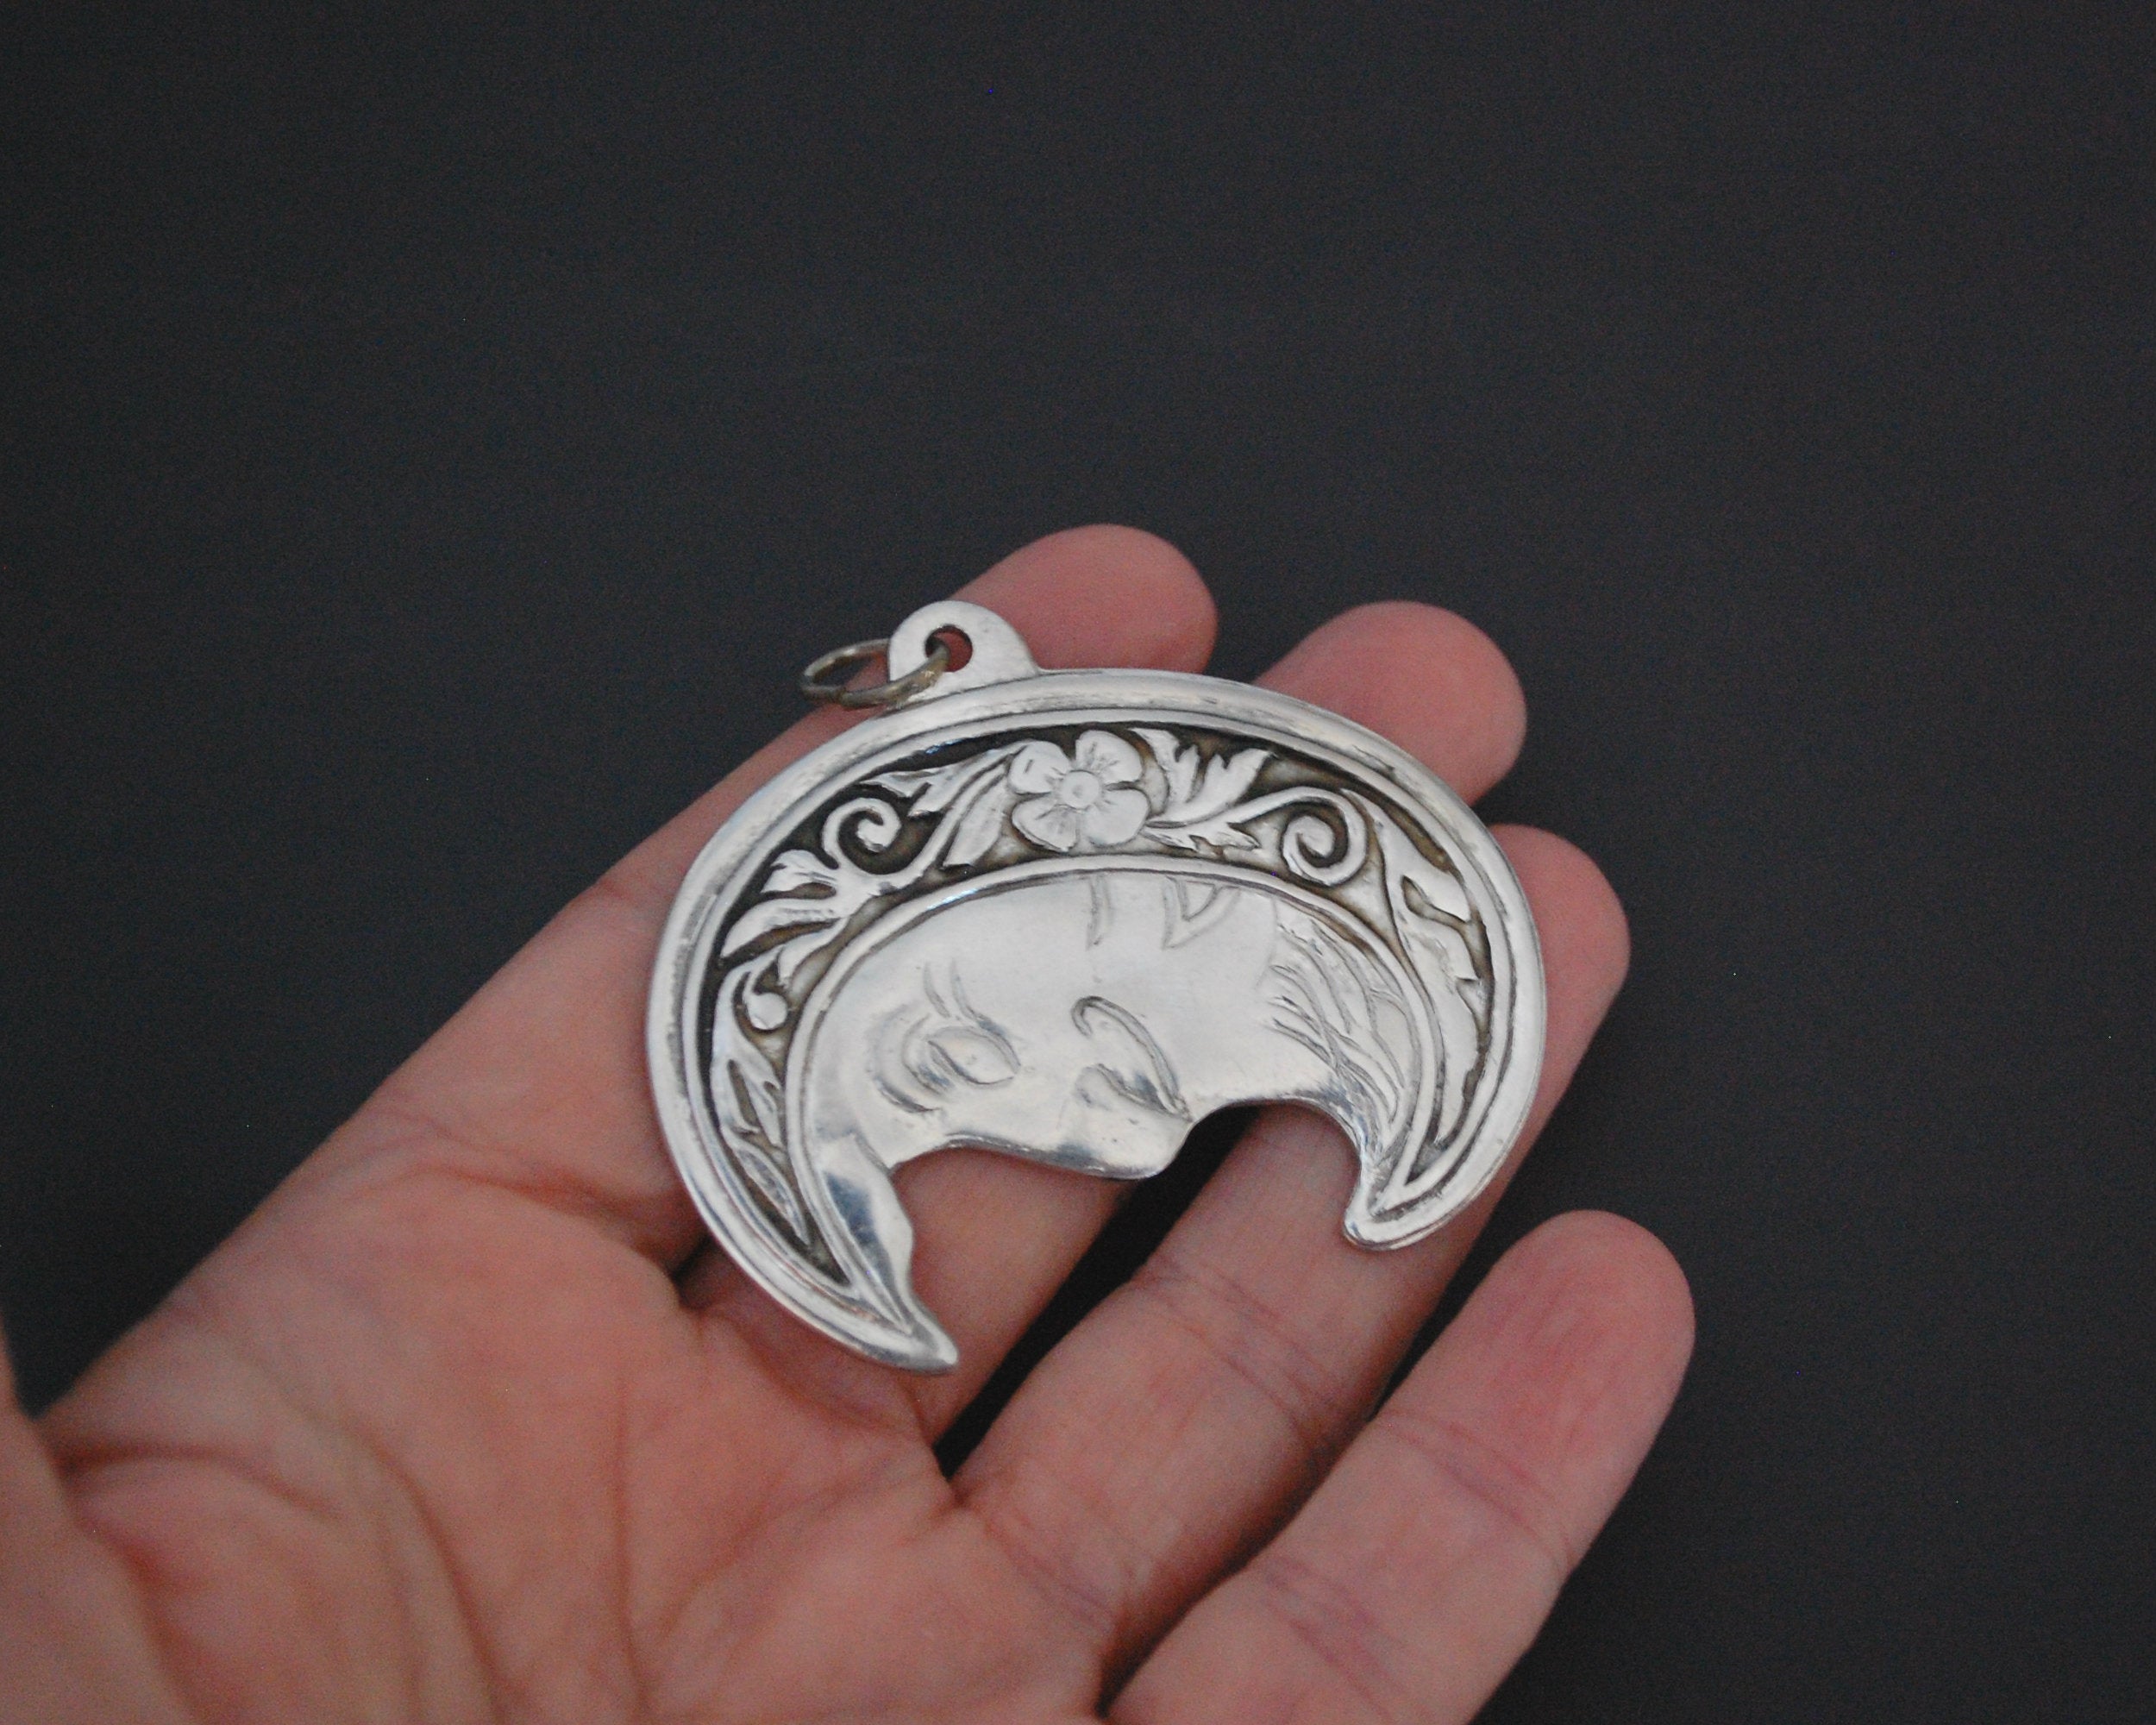 Man in the Moon - Crescent Moon Pendant